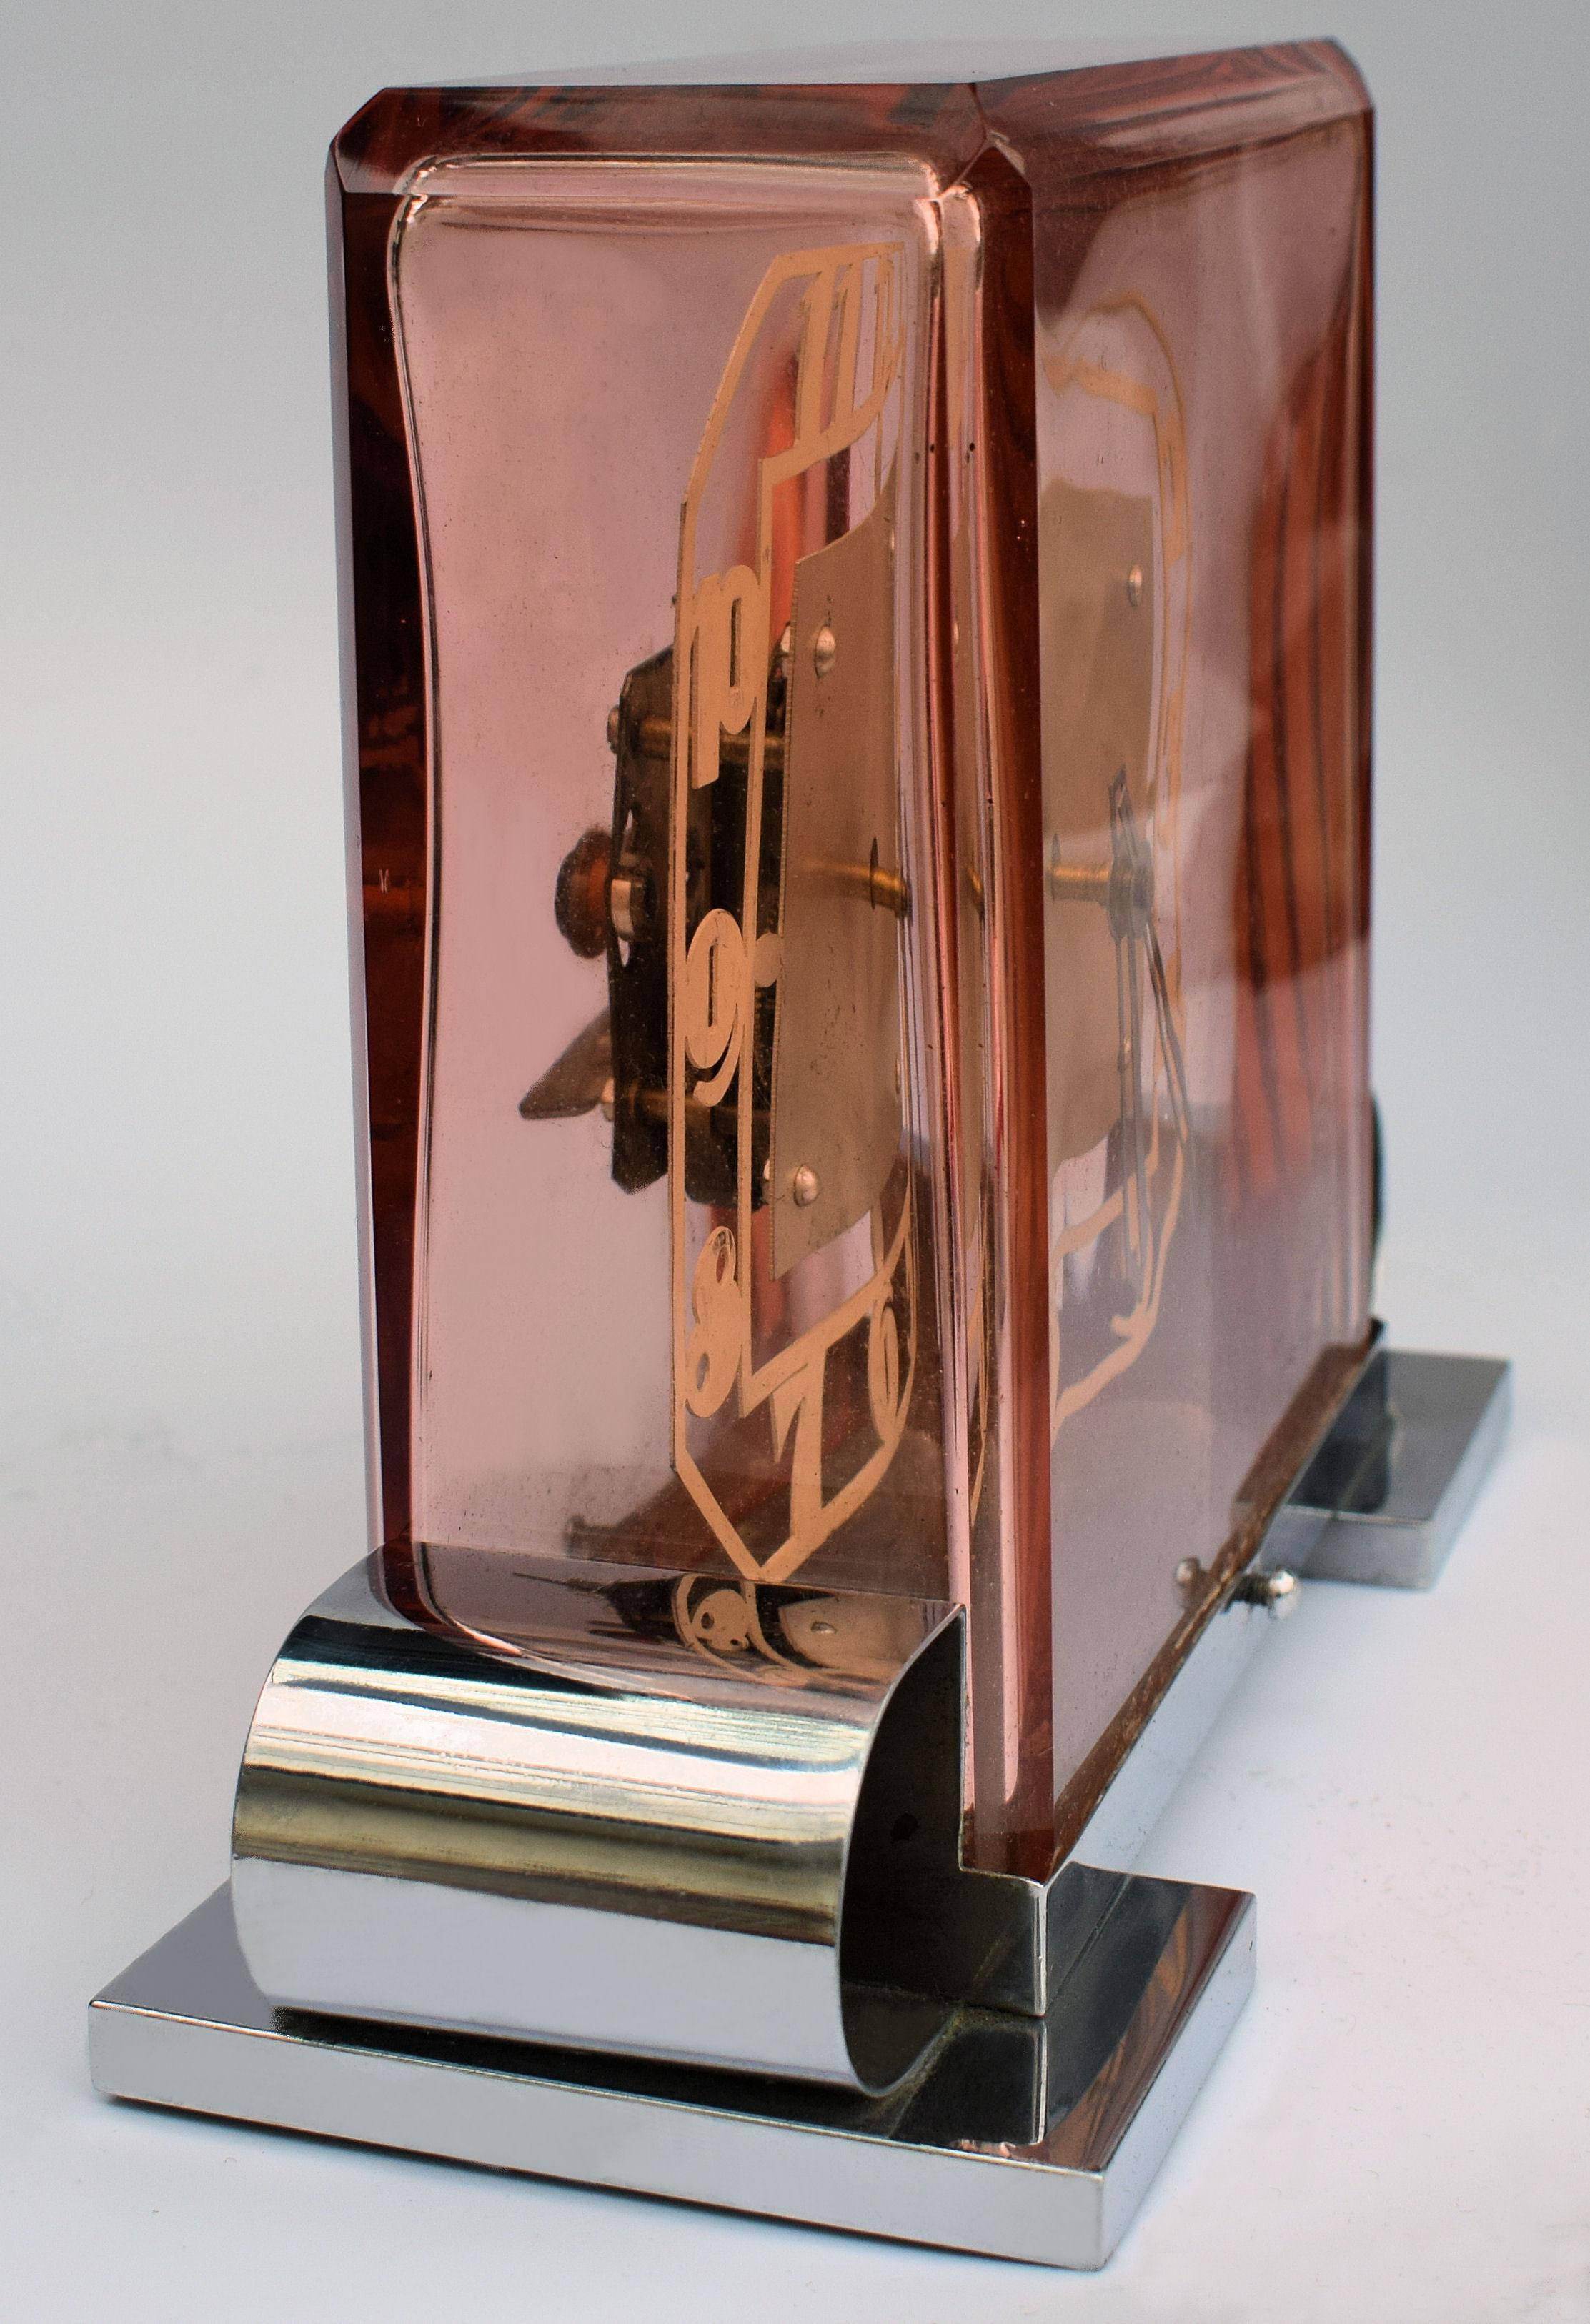 Aside the appearance and super rarity of this marvelous Art Deco clock on first viewing, one can't be distracted away from the condition of the clock which for it's 90 odd years is impressive. This really is a collectors piece and are pretty sure